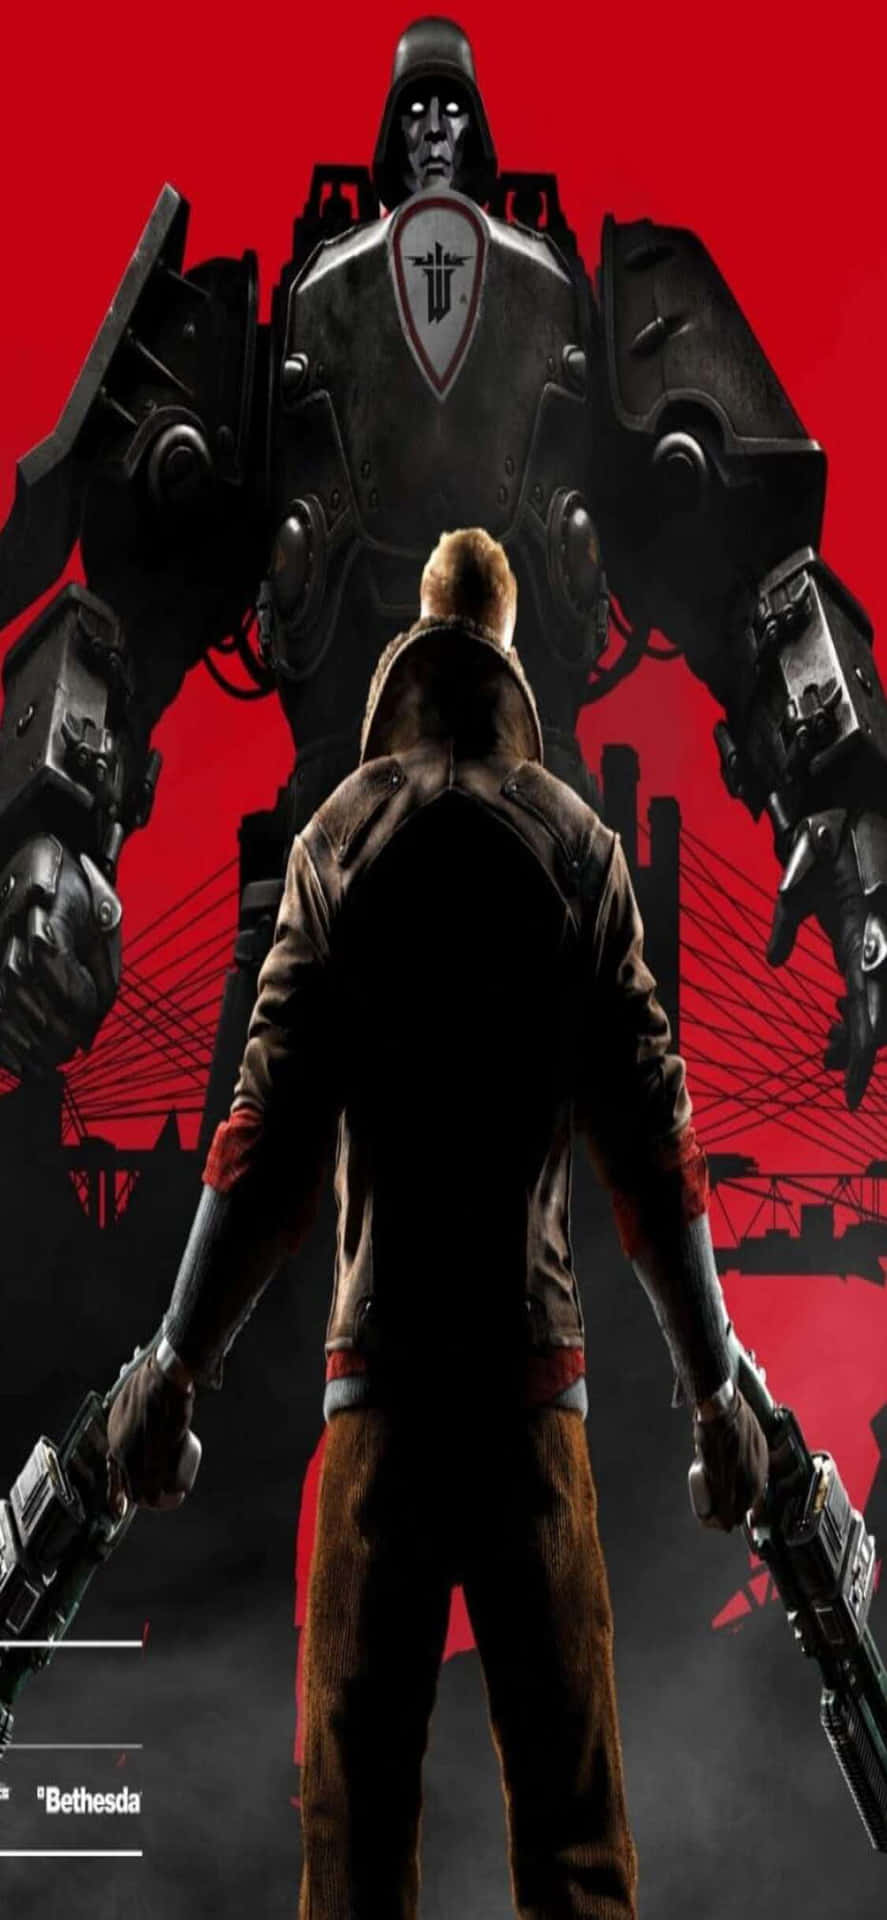 Enjoy the fully immersive gaming experience of Wolfenstein II on the latest iPhone Xs